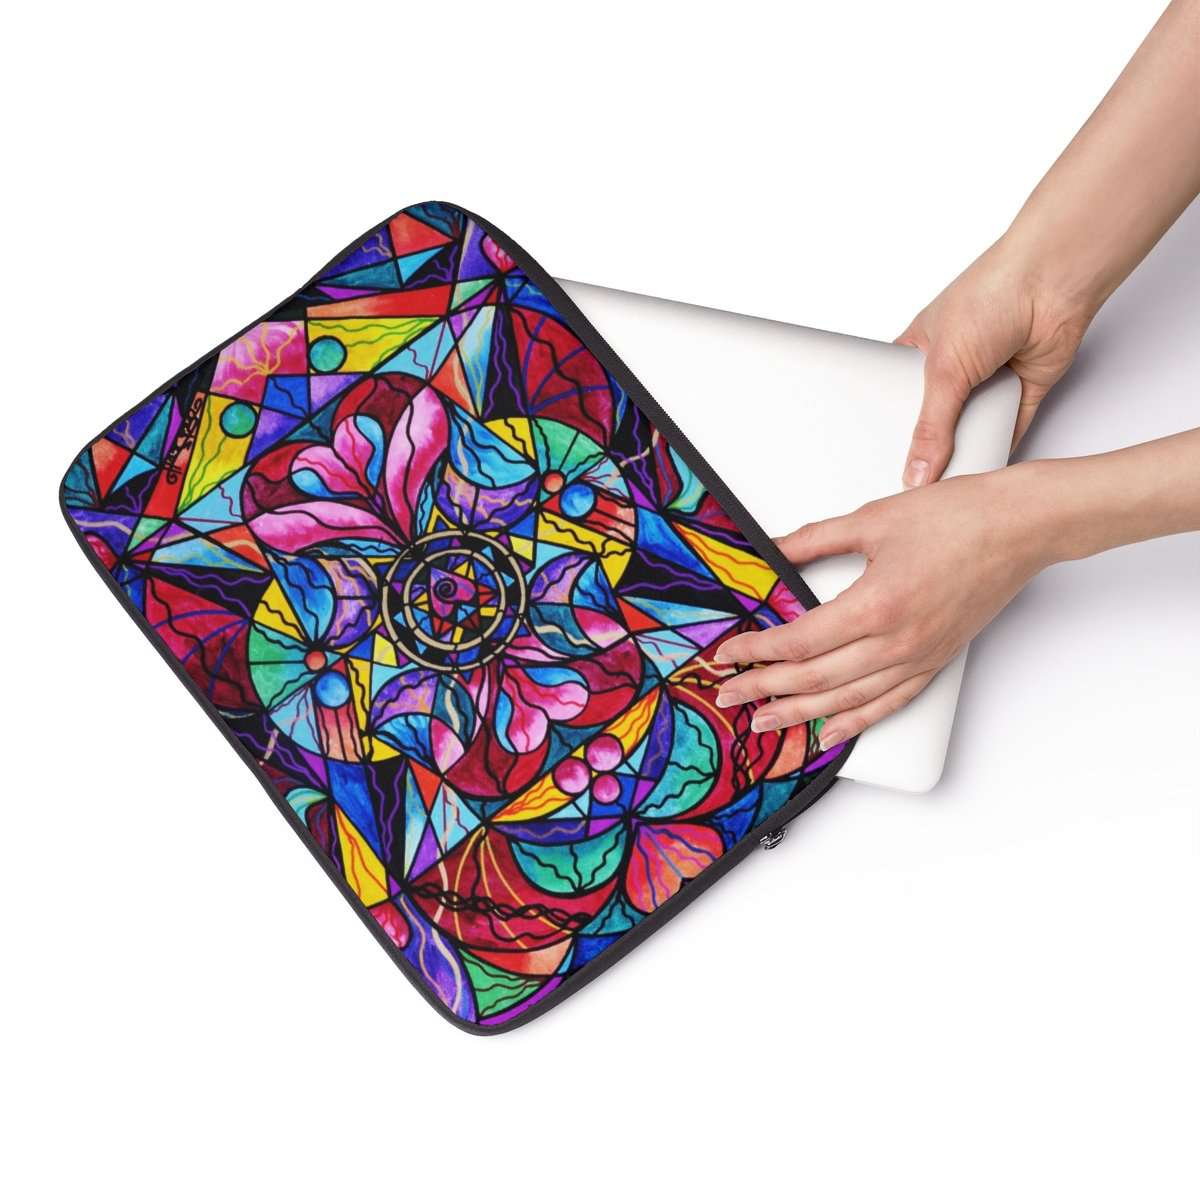 we-offer-the-best-prices-on-the-best-of-blue-ray-self-love-grid-laptop-sleeve-online_3.jpg